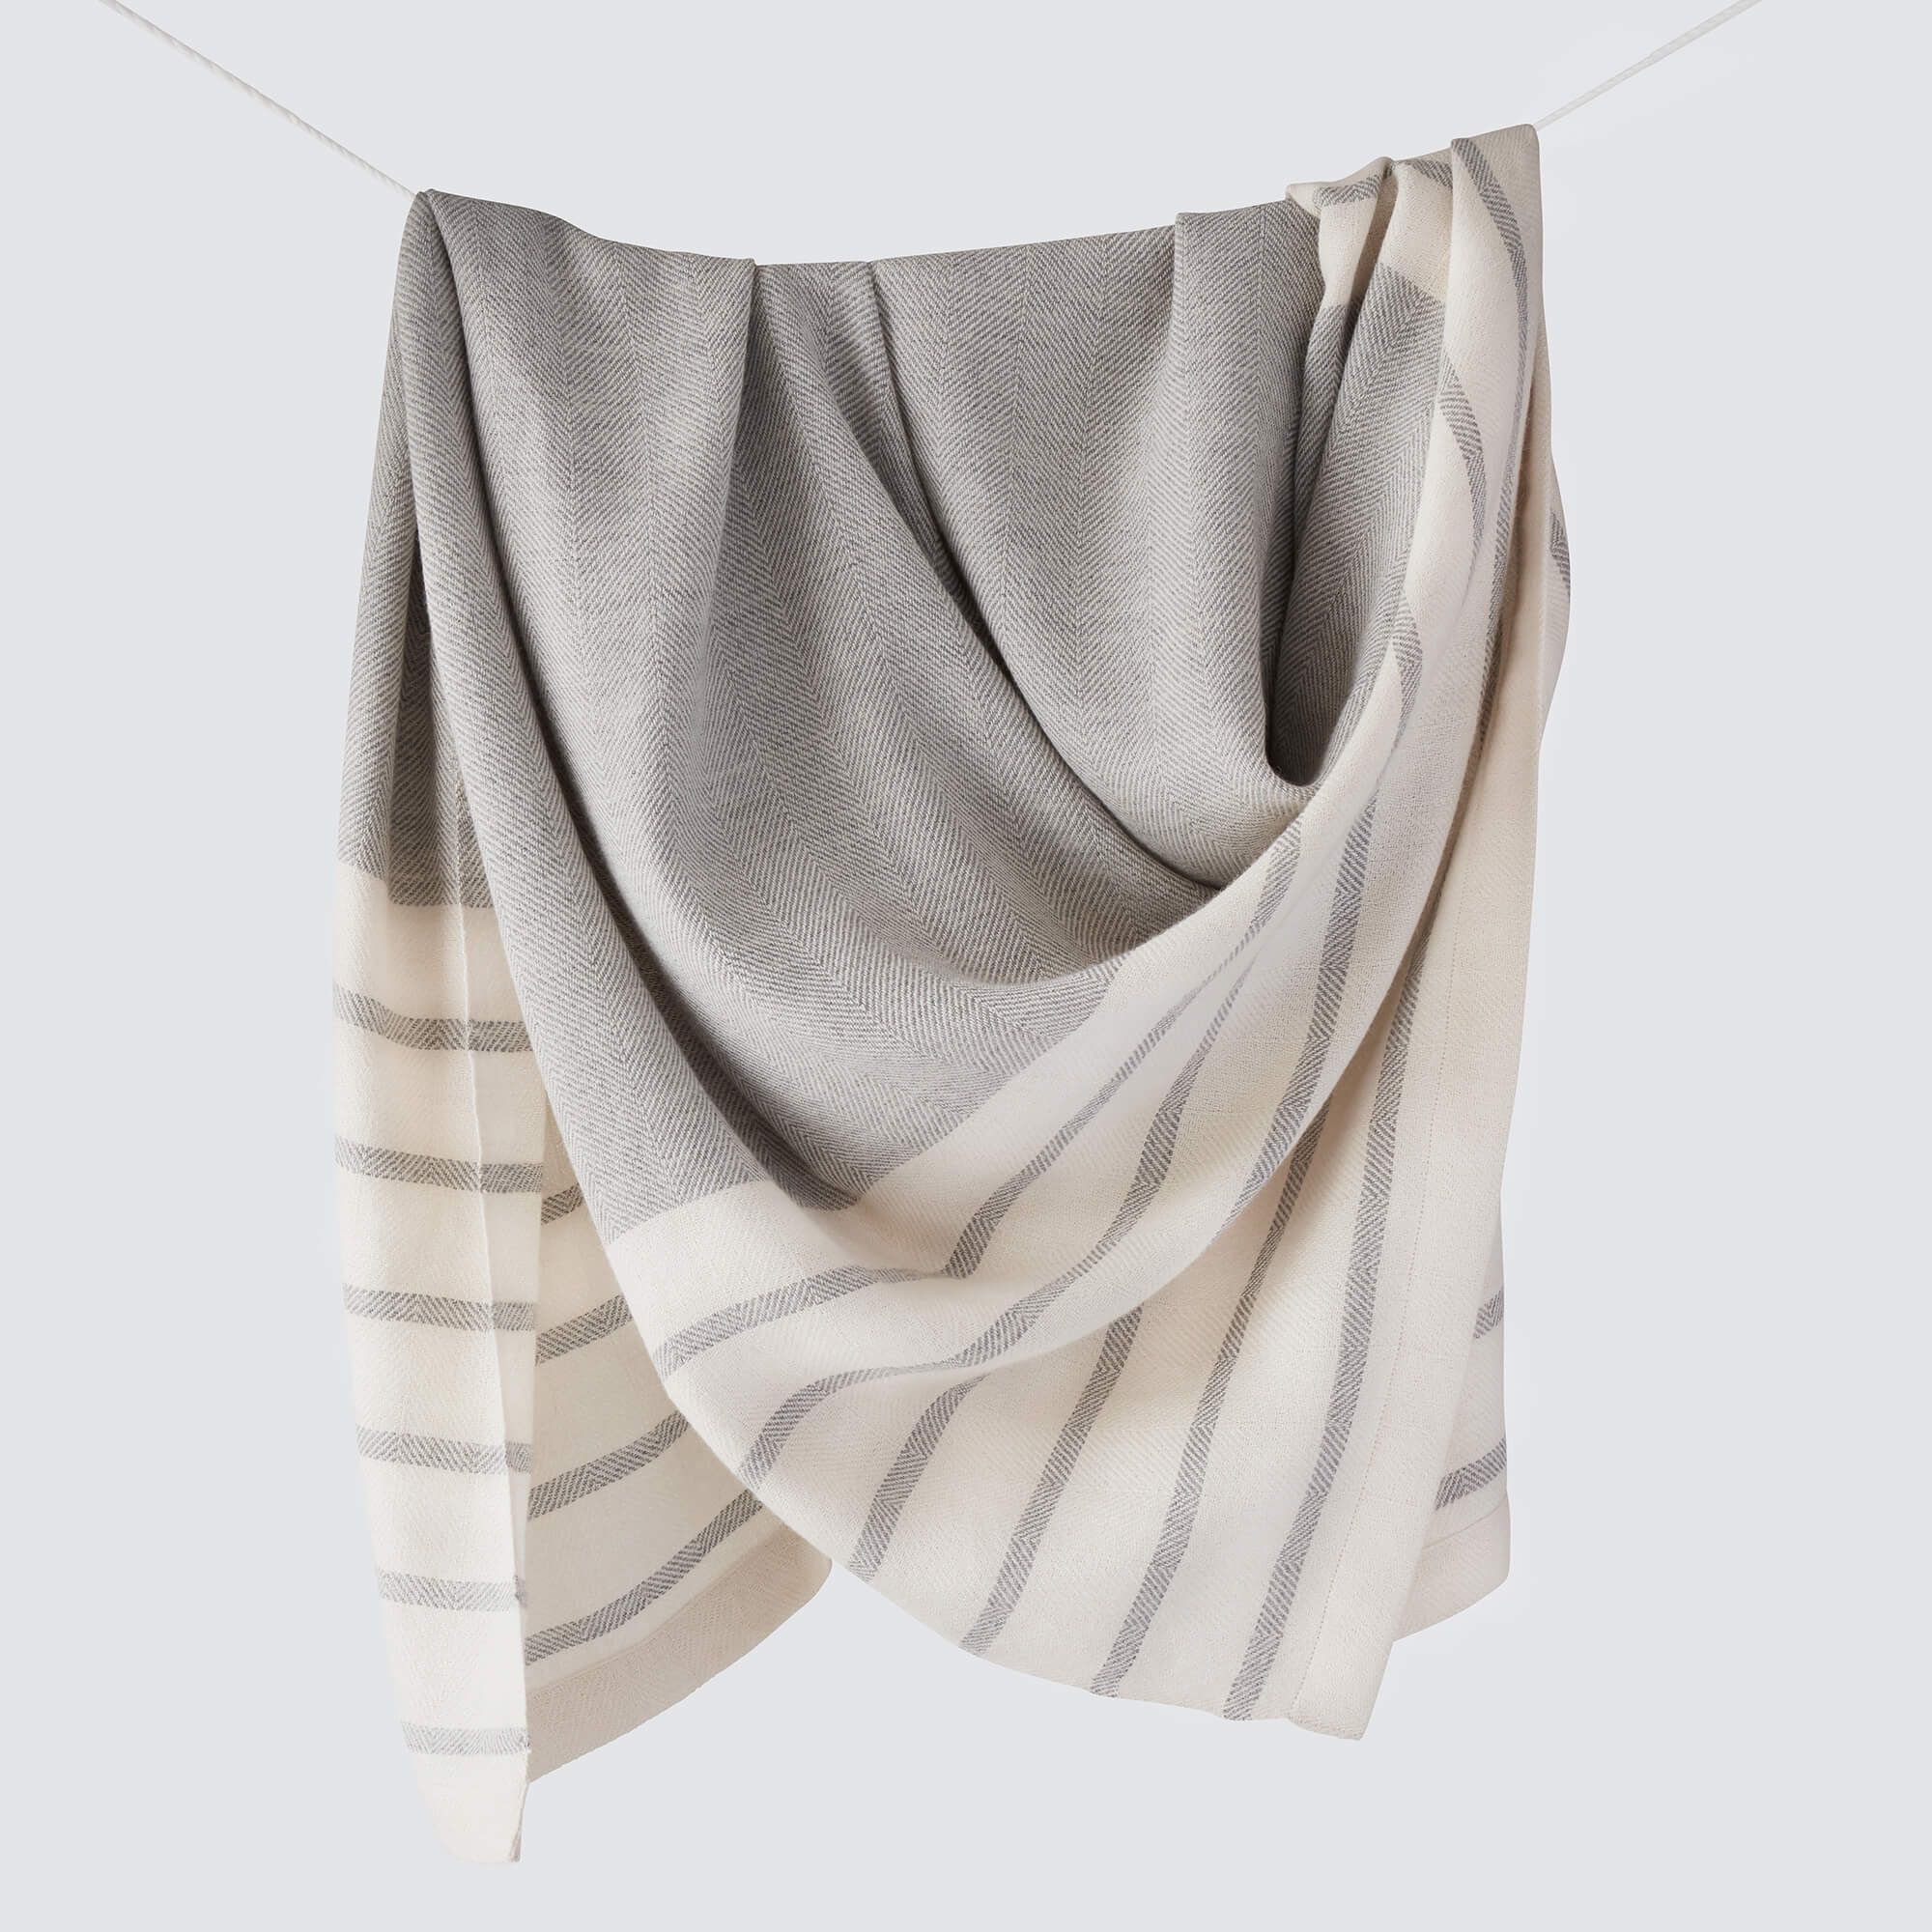 Grey and Cream Alpaca Throw Blanket | The Citizenry | The Citizenry